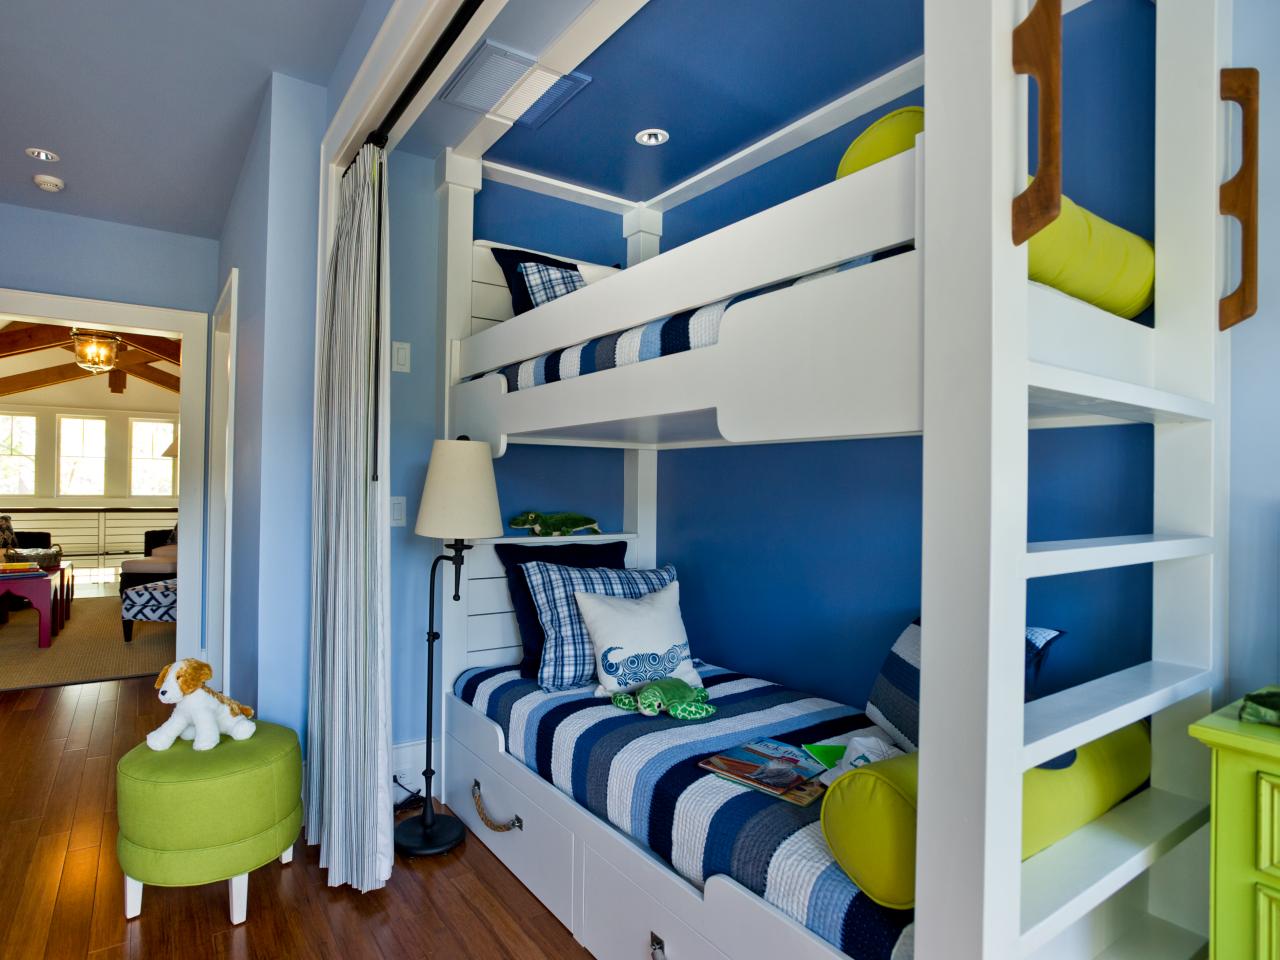 Kids With Theme Bunk Beds, Themed Bunk Beds